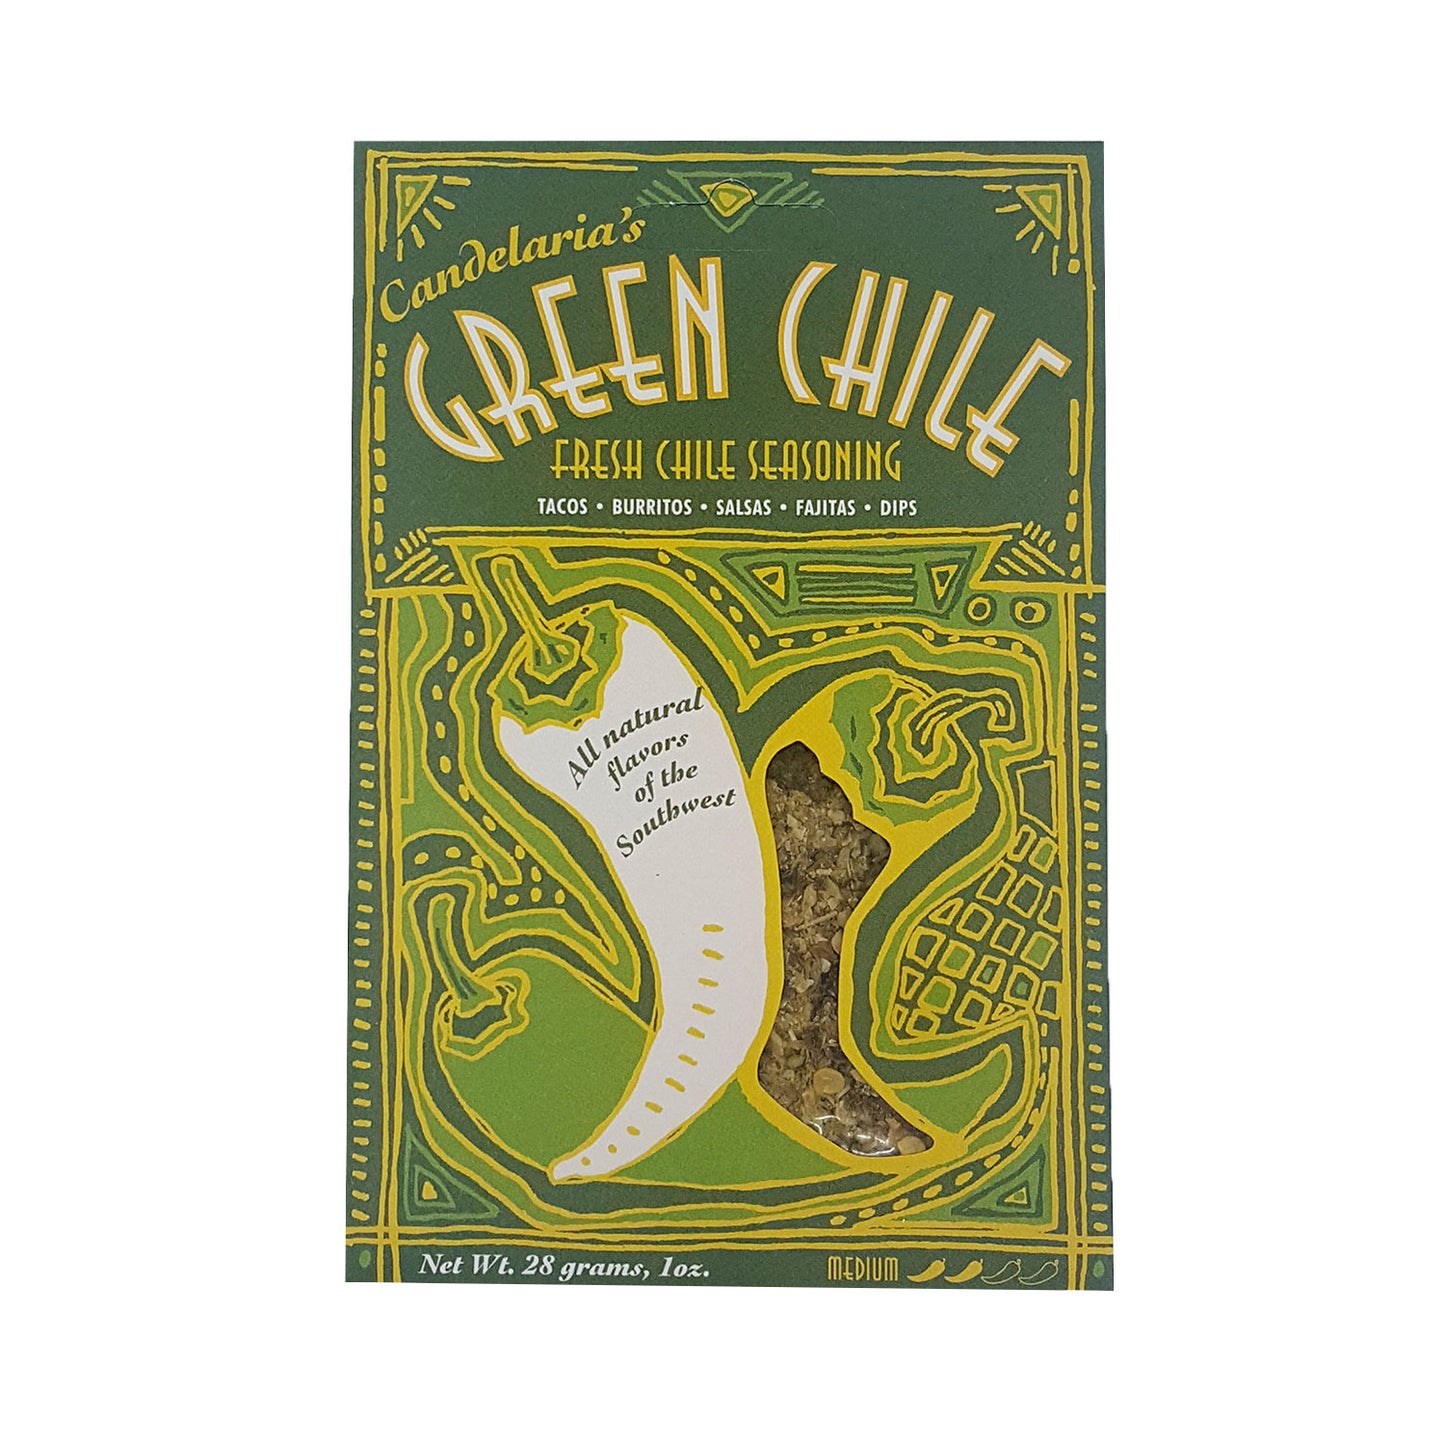 Fresh green chile seasoning - Makes an award winning Green Chile Dip! Also for Marinades, Tacos, Burritos, Salsas and Fajitas, recipes on packaging Green chile, onions, sea salt, select spices All natural, Gluten free, no sugar or preservatives, very low sodium Medium heat 1 oz. spice pack